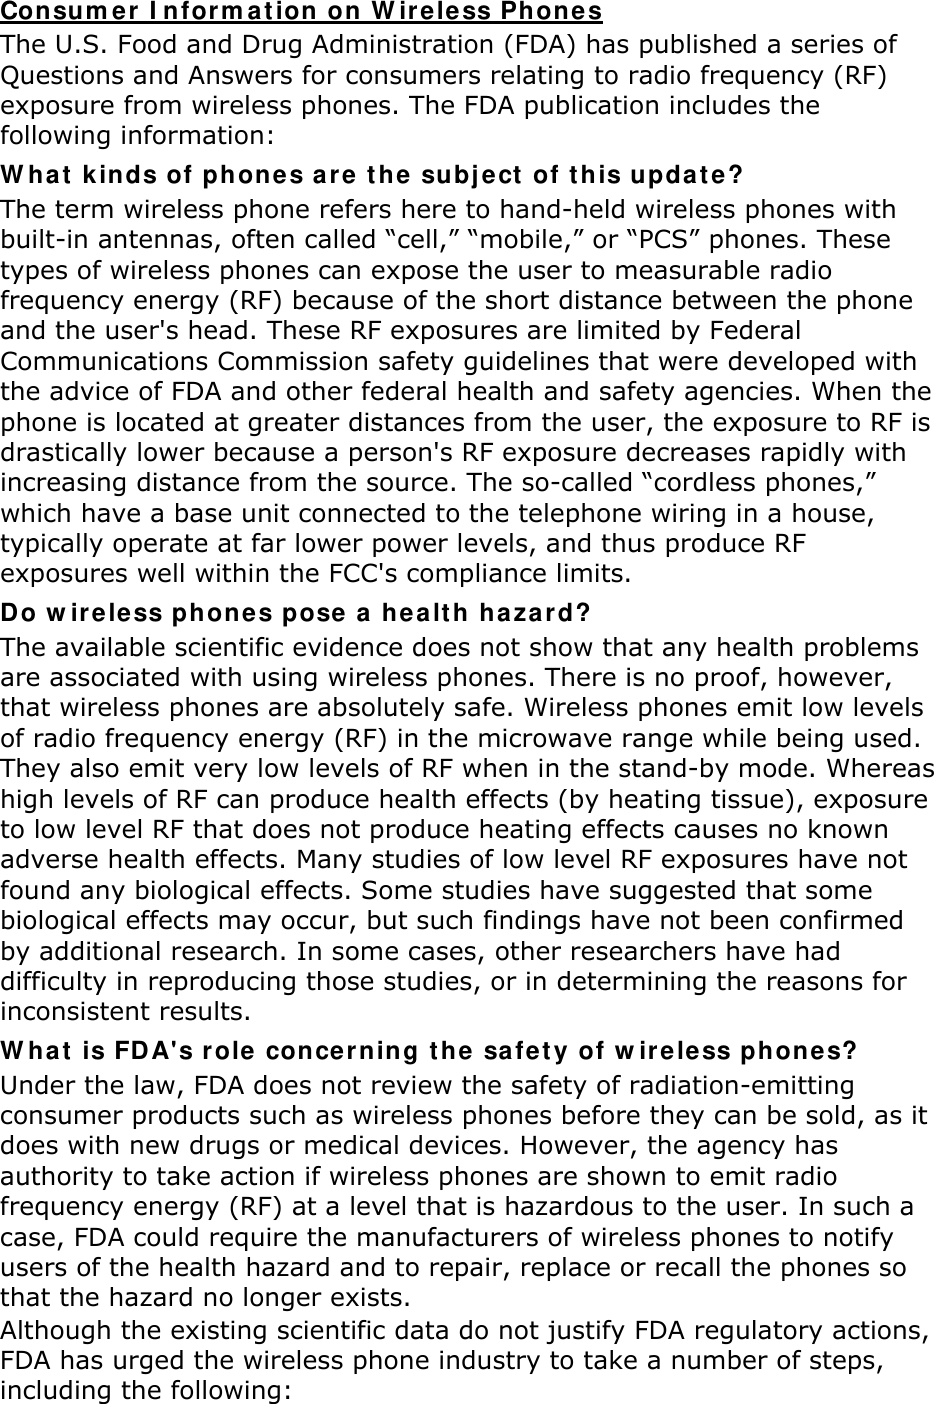 Consum er  I nform at ion on W ire less Phone s The U.S. Food and Drug Administration (FDA) has published a series of Questions and Answers for consumers relating to radio frequency (RF) exposure from wireless phones. The FDA publication includes the following information: W hat  k inds of phones are  t he subj ect  of t his updat e? The term wireless phone refers here to hand-held wireless phones with built-in antennas, often called “cell,” “mobile,” or “PCS” phones. These types of wireless phones can expose the user to measurable radio frequency energy (RF) because of the short distance between the phone and the user&apos;s head. These RF exposures are limited by Federal Communications Commission safety guidelines that were developed with the advice of FDA and other federal health and safety agencies. When the phone is located at greater distances from the user, the exposure to RF is drastically lower because a person&apos;s RF exposure decreases rapidly with increasing distance from the source. The so-called “cordless phones,” which have a base unit connected to the telephone wiring in a house, typically operate at far lower power levels, and thus produce RF exposures well within the FCC&apos;s compliance limits. Do w ir eless phones pose a he a lt h ha zar d? The available scientific evidence does not show that any health problems are associated with using wireless phones. There is no proof, however, that wireless phones are absolutely safe. Wireless phones emit low levels of radio frequency energy (RF) in the microwave range while being used. They also emit very low levels of RF when in the stand-by mode. Whereas high levels of RF can produce health effects (by heating tissue), exposure to low level RF that does not produce heating effects causes no known adverse health effects. Many studies of low level RF exposures have not found any biological effects. Some studies have suggested that some biological effects may occur, but such findings have not been confirmed by additional research. In some cases, other researchers have had difficulty in reproducing those studies, or in determining the reasons for inconsistent results. W hat  is FDA&apos;s role  concern ing t he safet y of w ire less phone s? Under the law, FDA does not review the safety of radiation-emitting consumer products such as wireless phones before they can be sold, as it does with new drugs or medical devices. However, the agency has authority to take action if wireless phones are shown to emit radio frequency energy (RF) at a level that is hazardous to the user. In such a case, FDA could require the manufacturers of wireless phones to notify users of the health hazard and to repair, replace or recall the phones so that the hazard no longer exists. Although the existing scientific data do not justify FDA regulatory actions, FDA has urged the wireless phone industry to take a number of steps, including the following: 